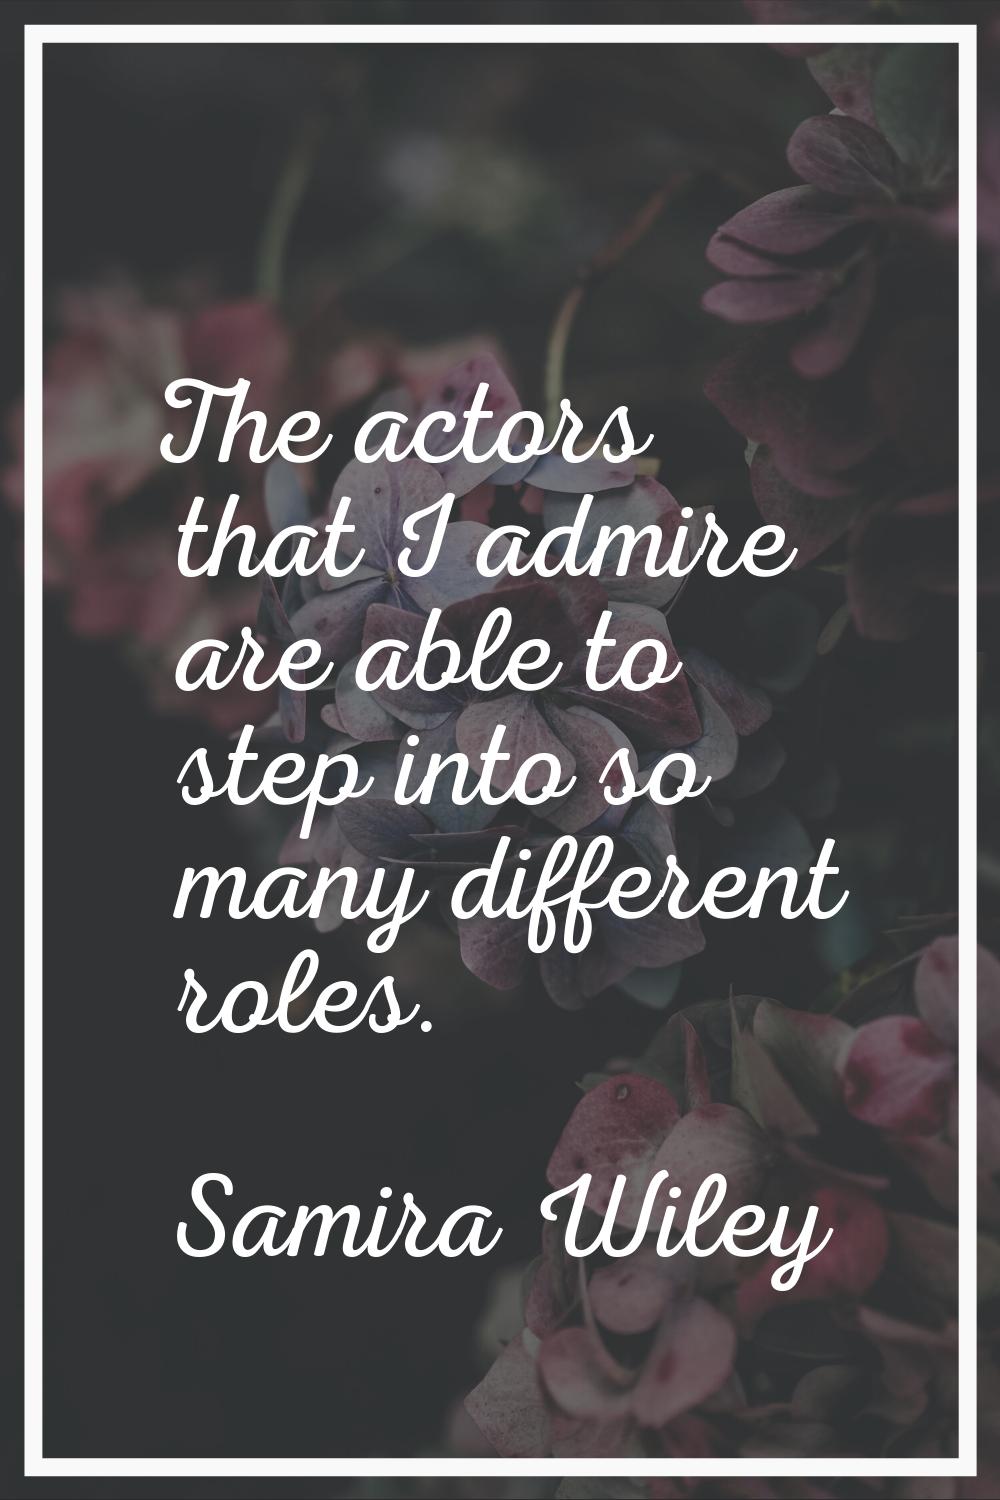 The actors that I admire are able to step into so many different roles.